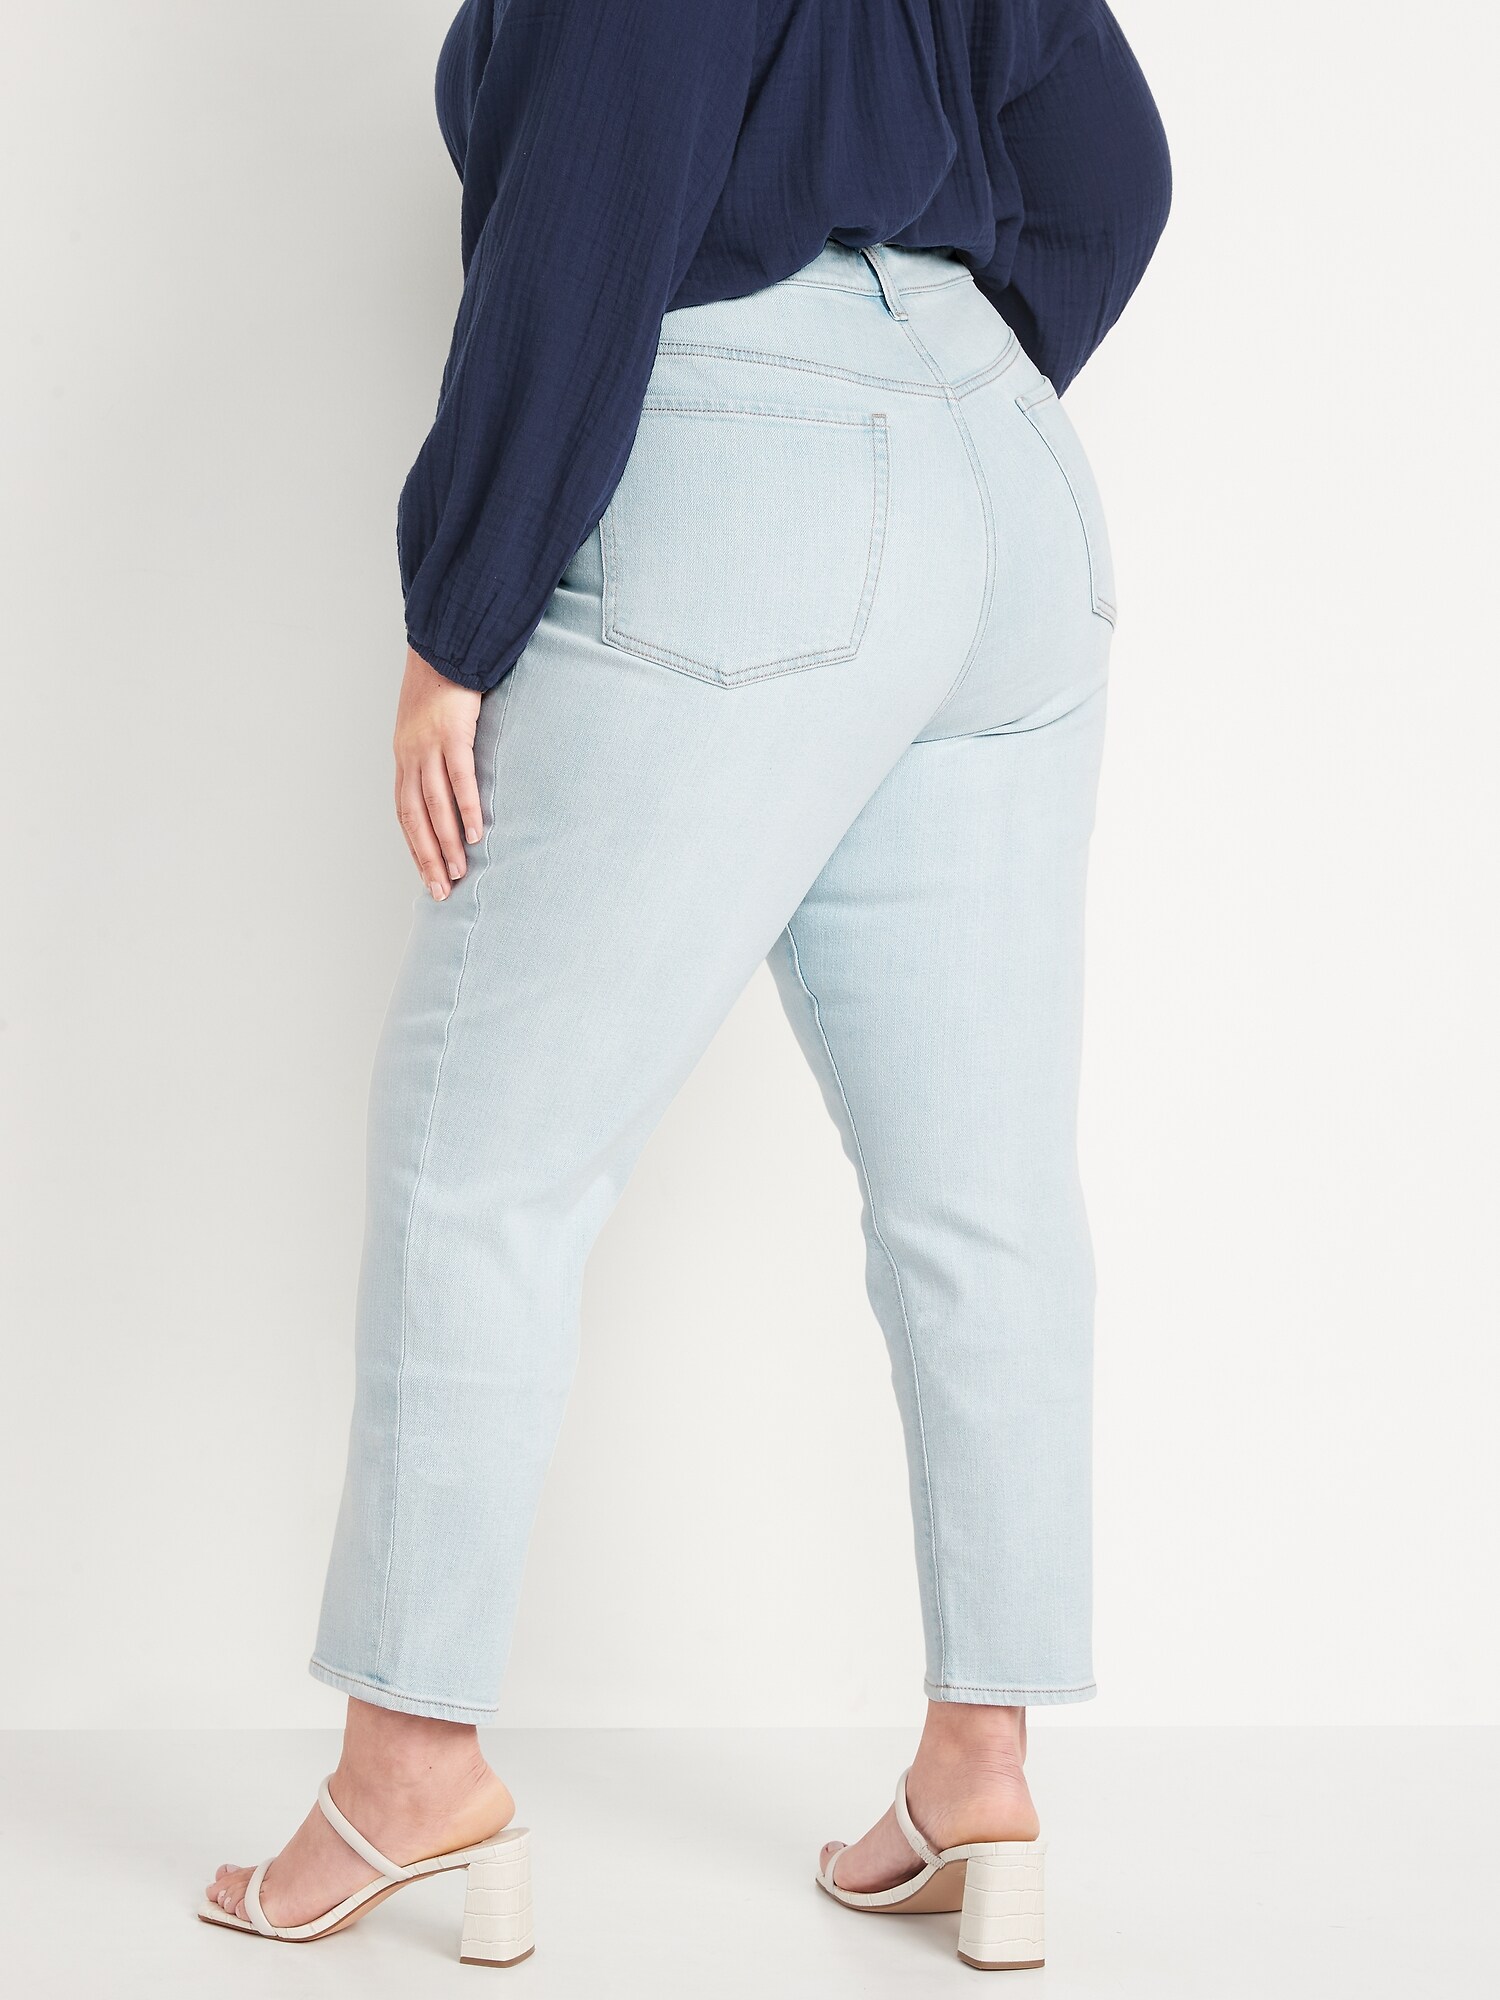 High-Waisted OG Straight Ankle Jeans for Women, Old Navy